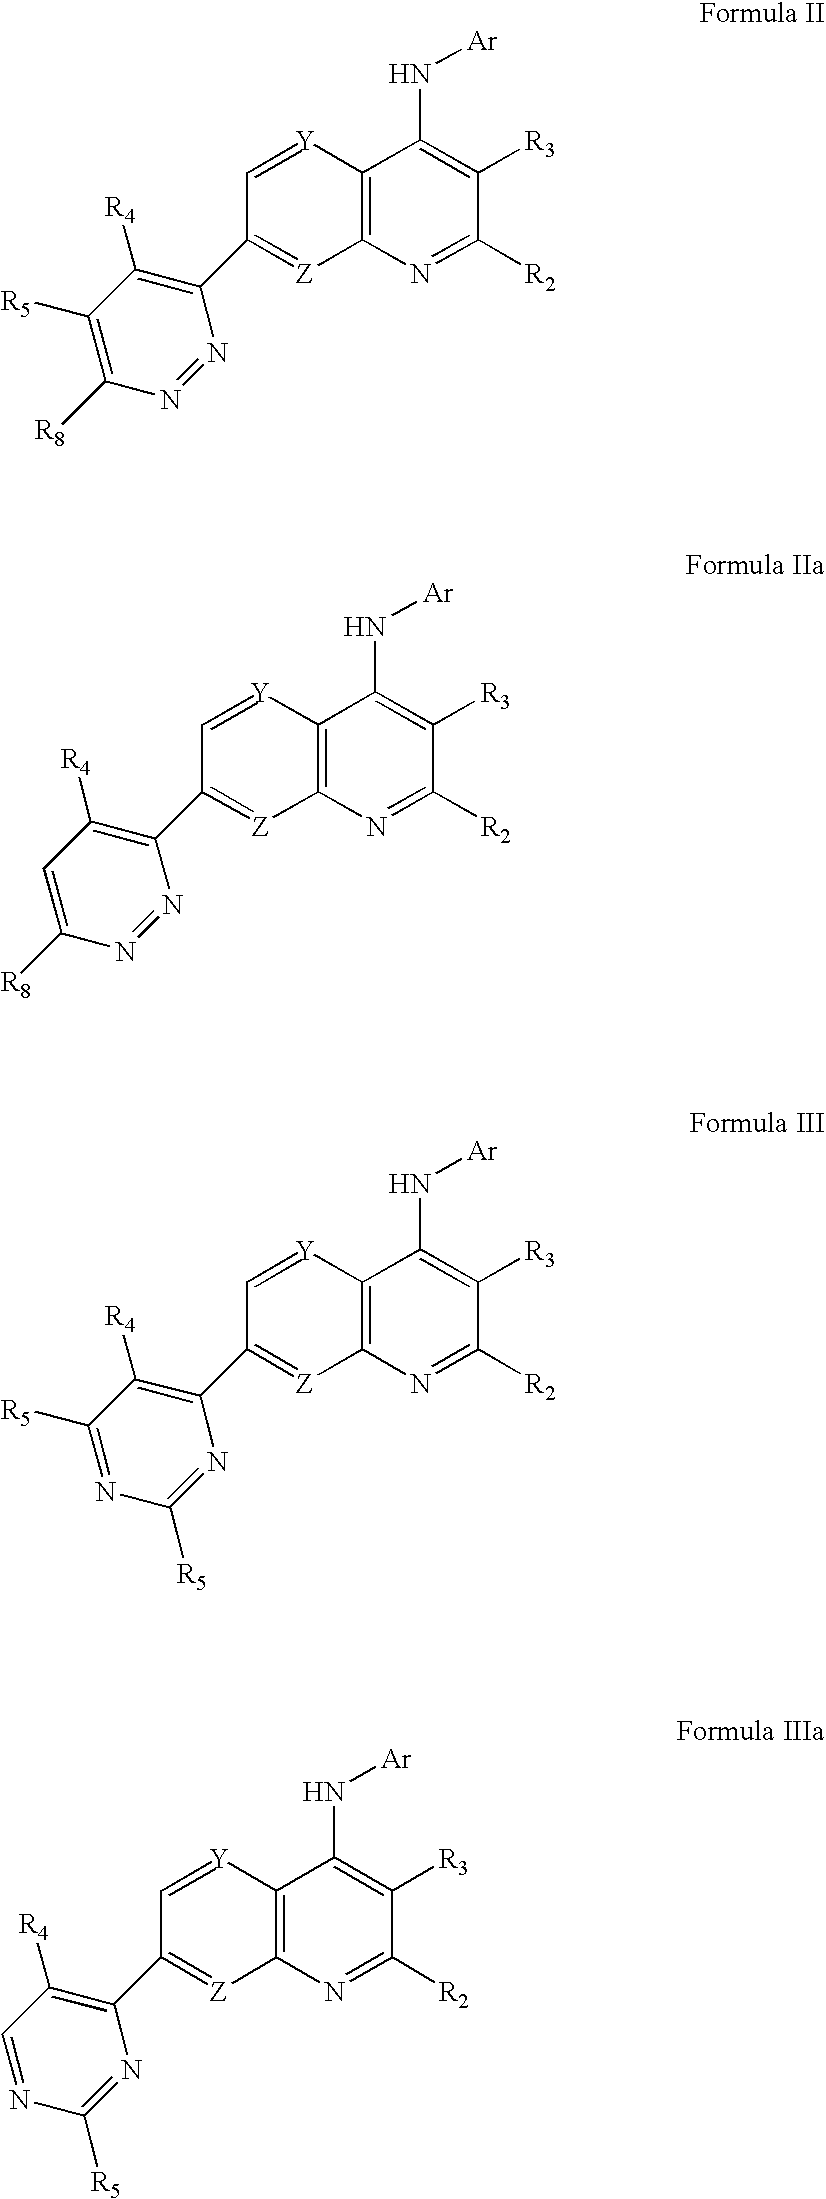 Substituted Pyridazinyl- and Pyrimidinyl-Quinolin-4-Ylamine Analogues